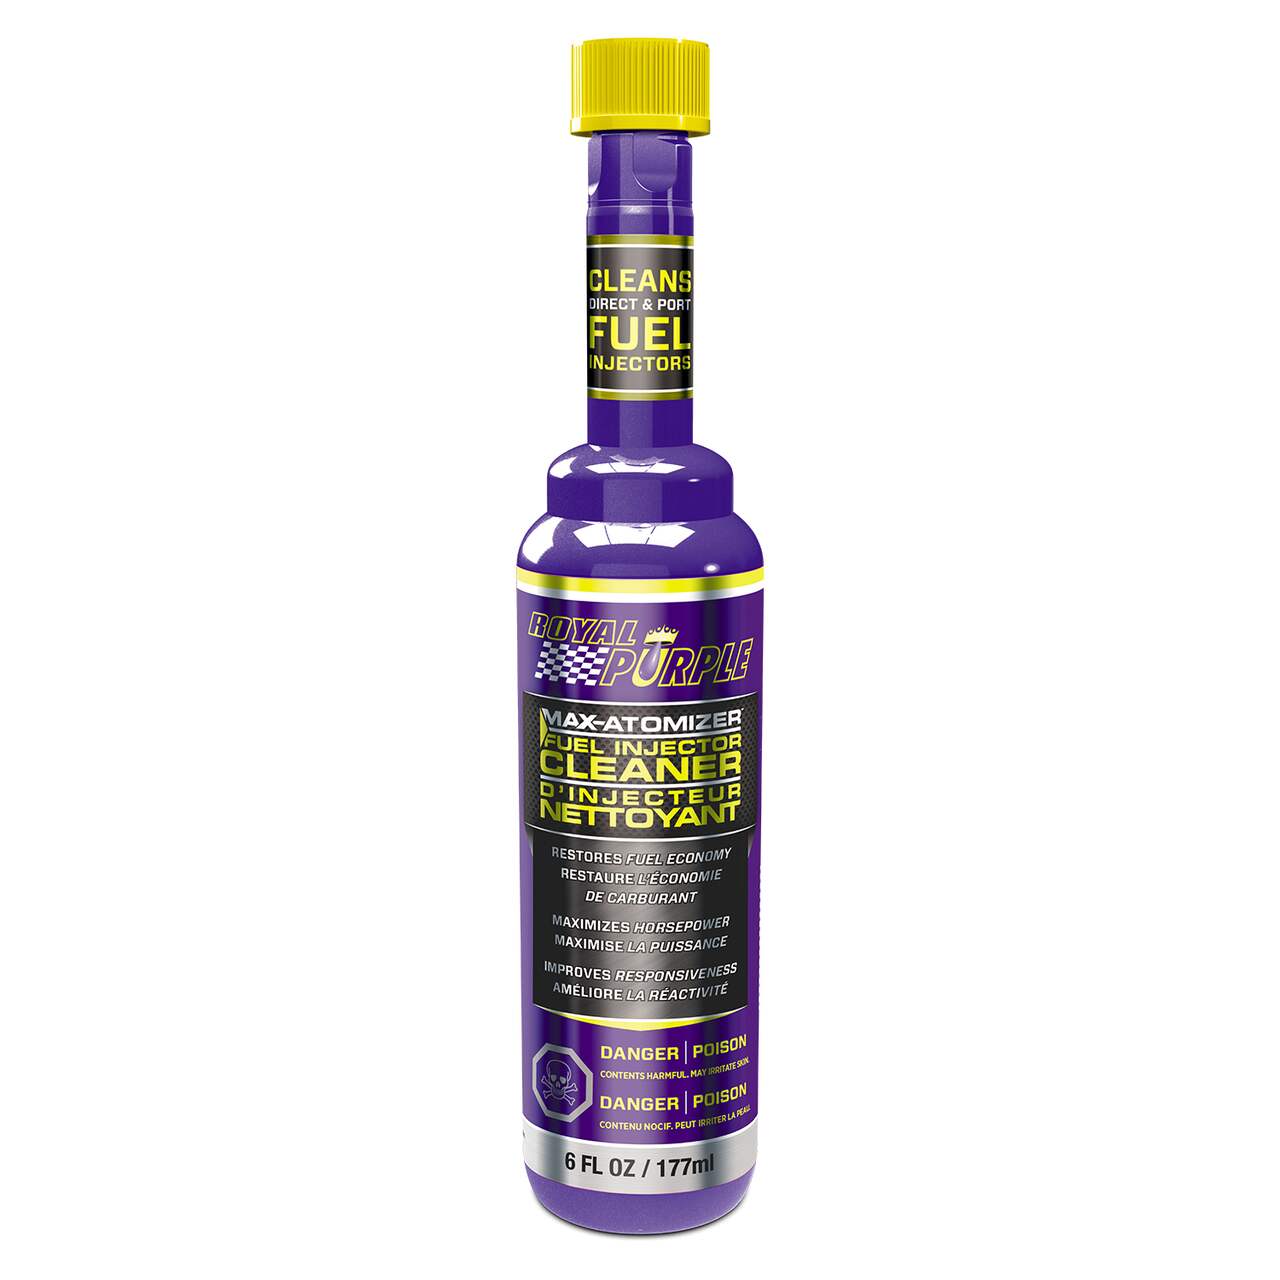 Petrol Specialist Injector Cleaner - Forté